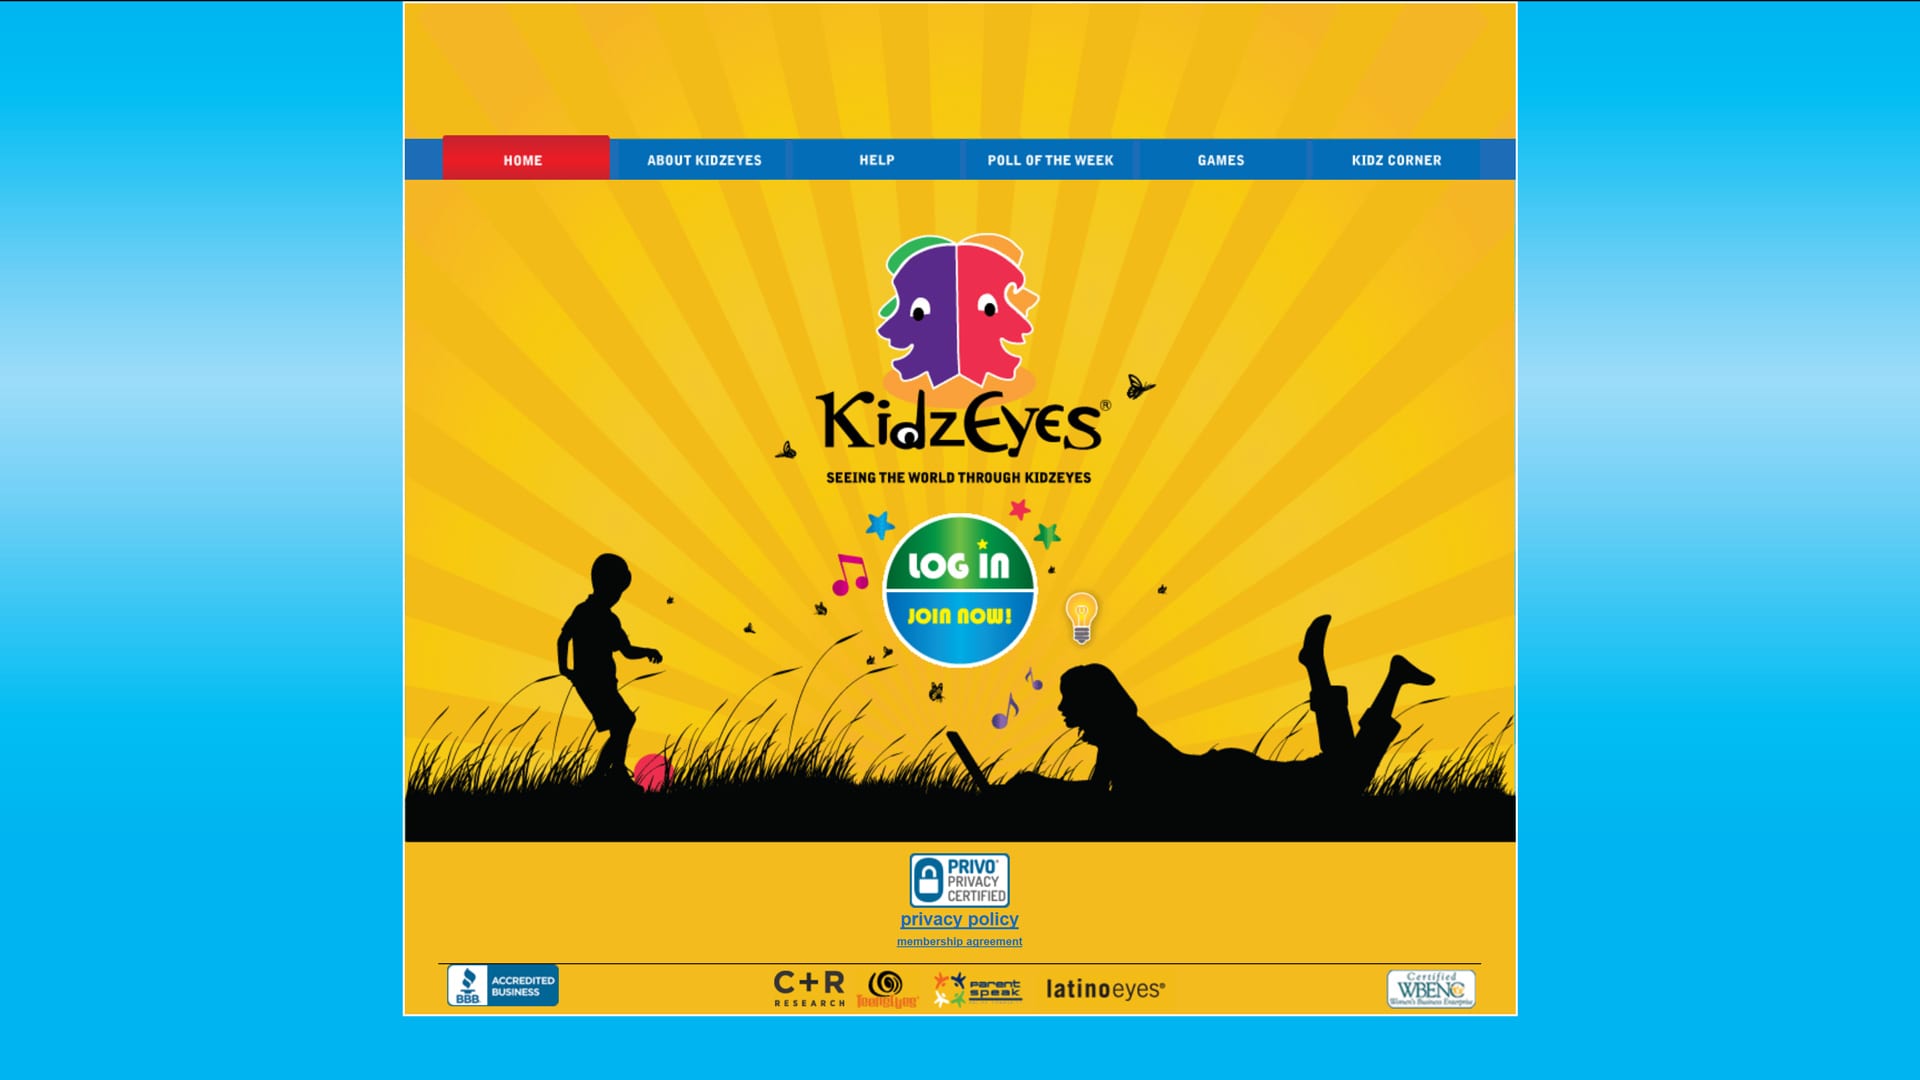 My personal review of KidzEyes - an online research panel that seeks opinions from US based children aged between 6-12 years old.